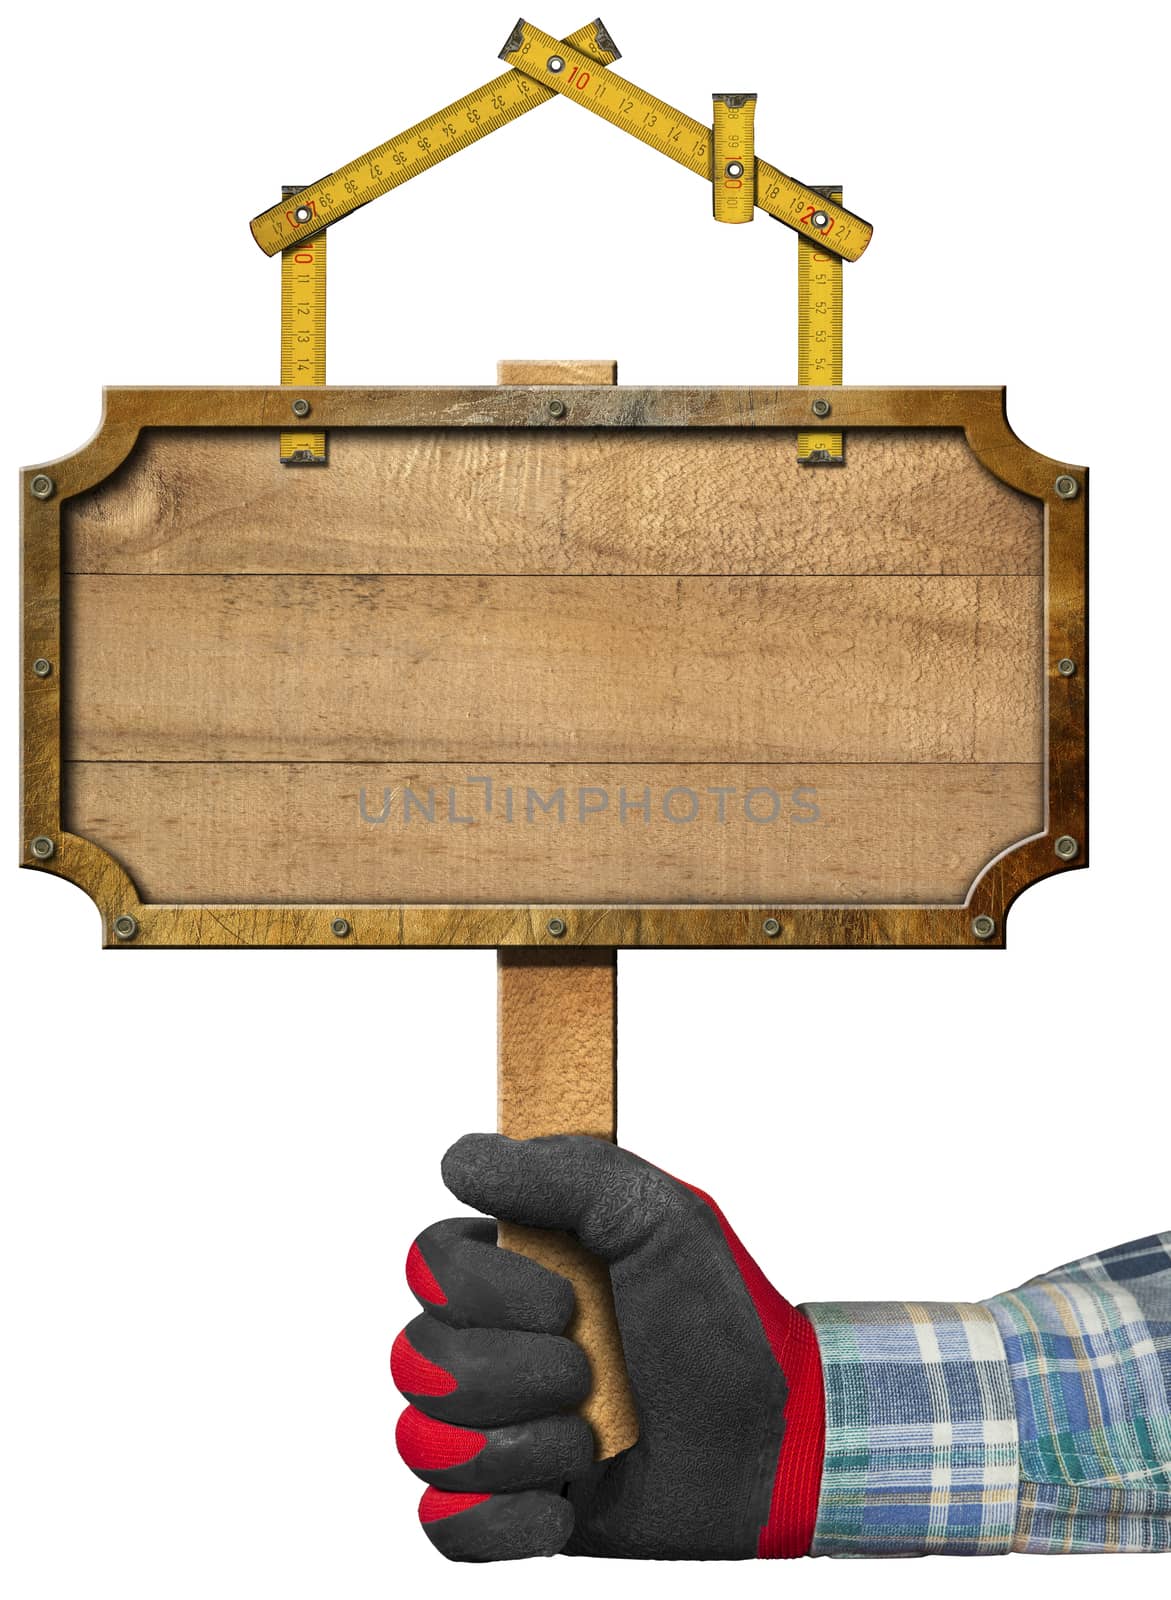 Wooden Sign for Construction Industry by catalby